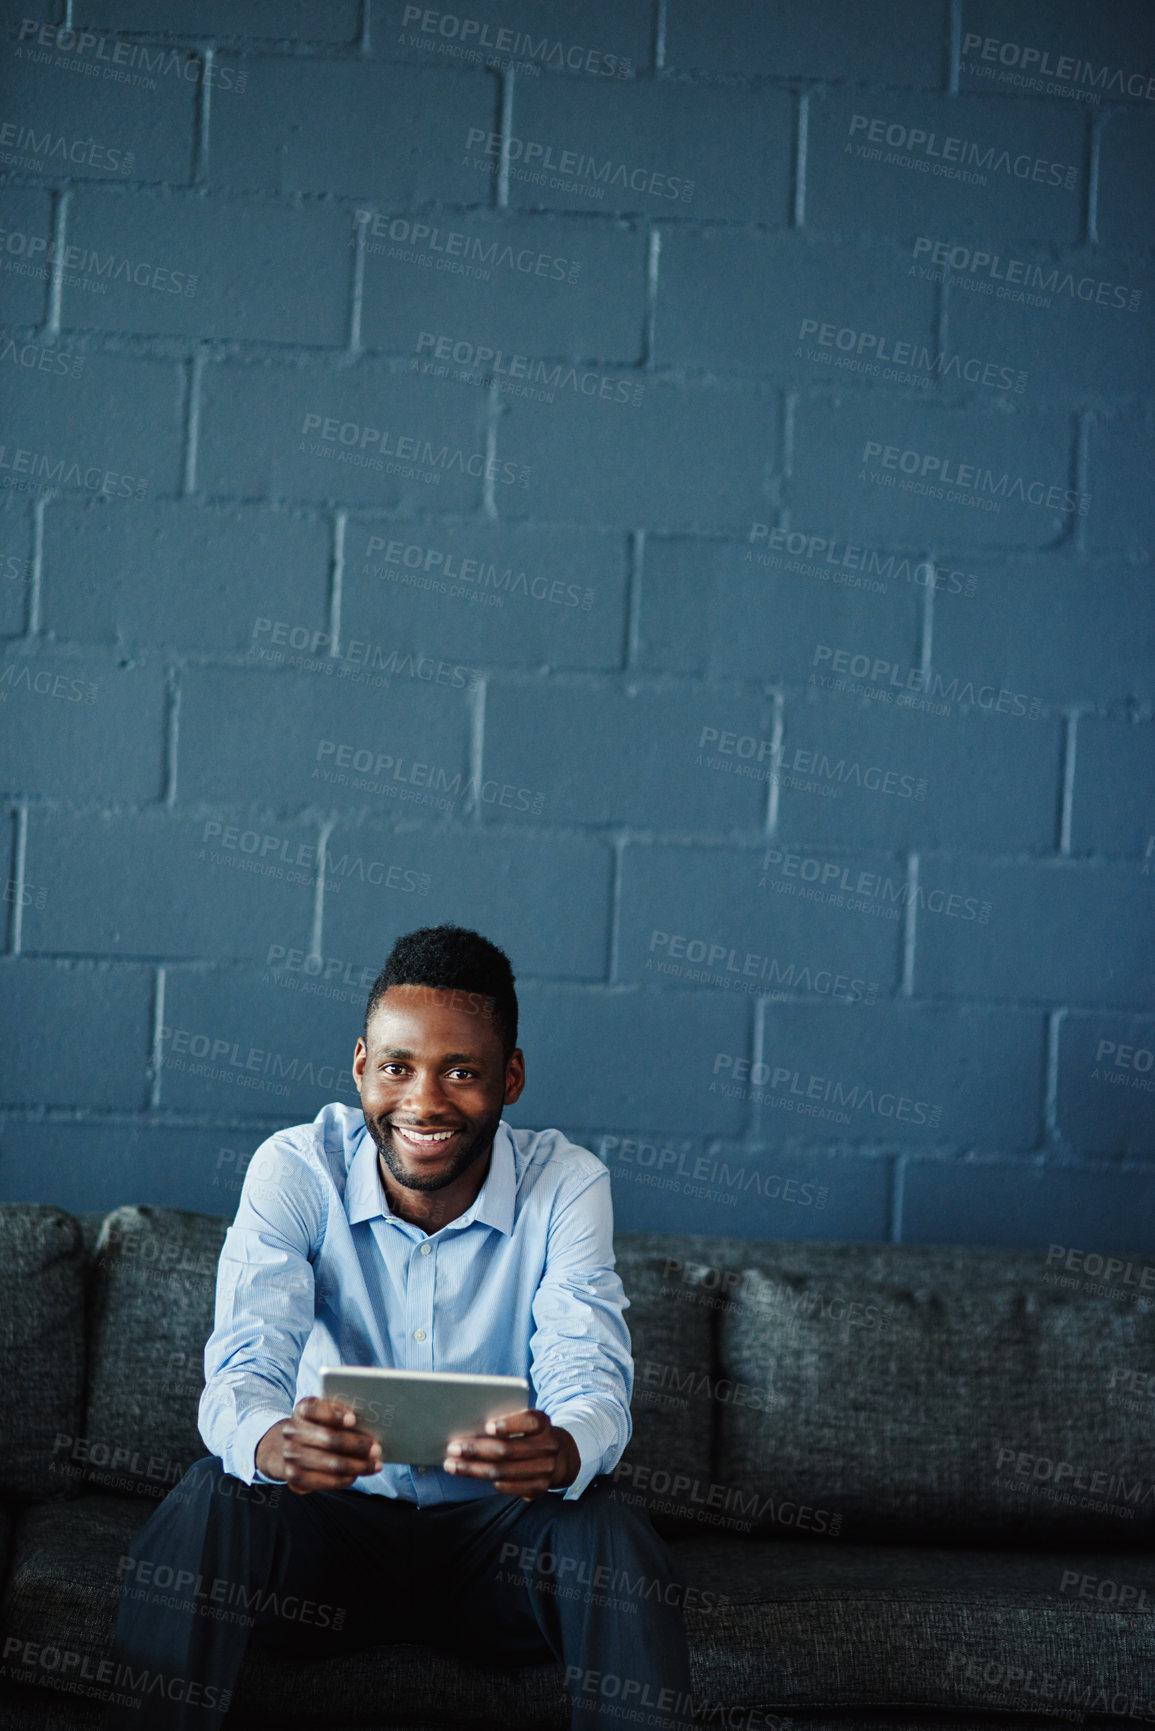 Buy stock photo Portrait of a businessman using a digital tablet